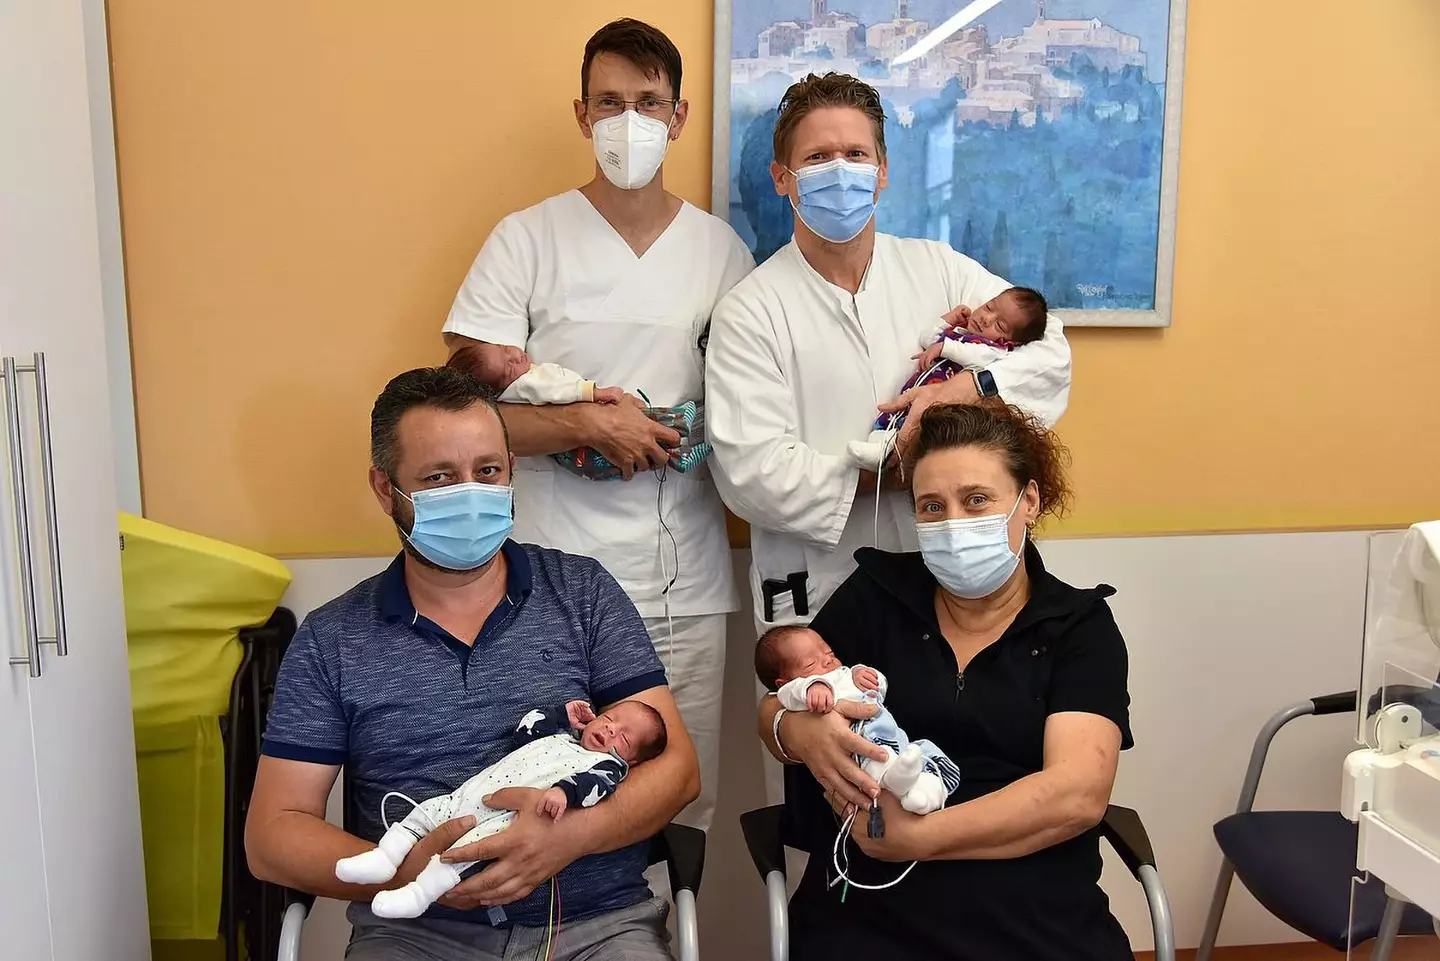 New parents Nilgun and Kayhan have welcomed quadruplets.